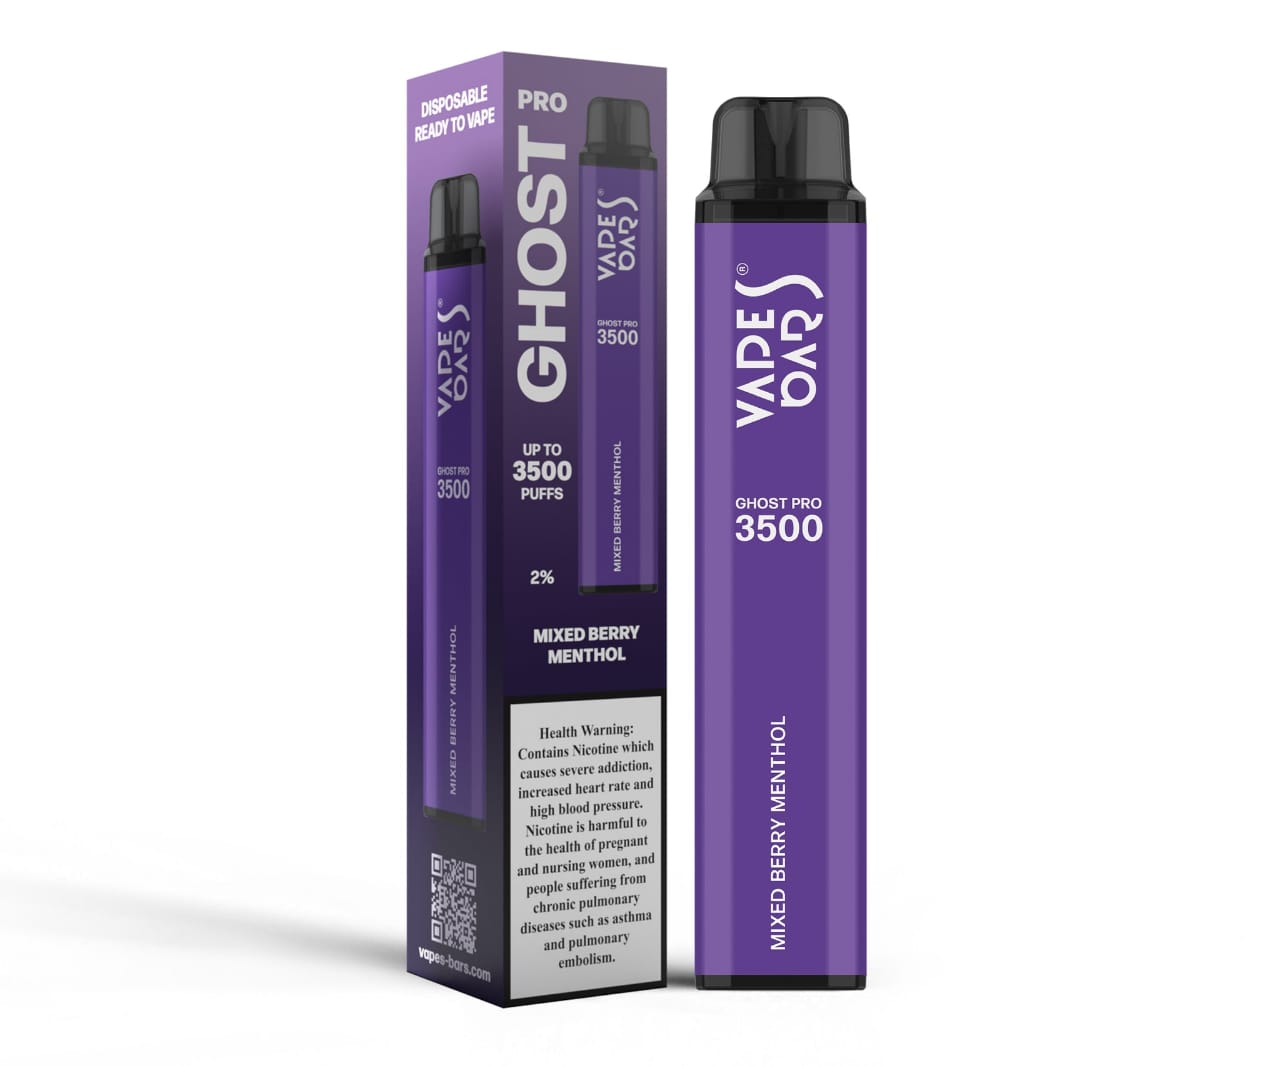 GHOST PRO MIXED BERRY MENTHOL